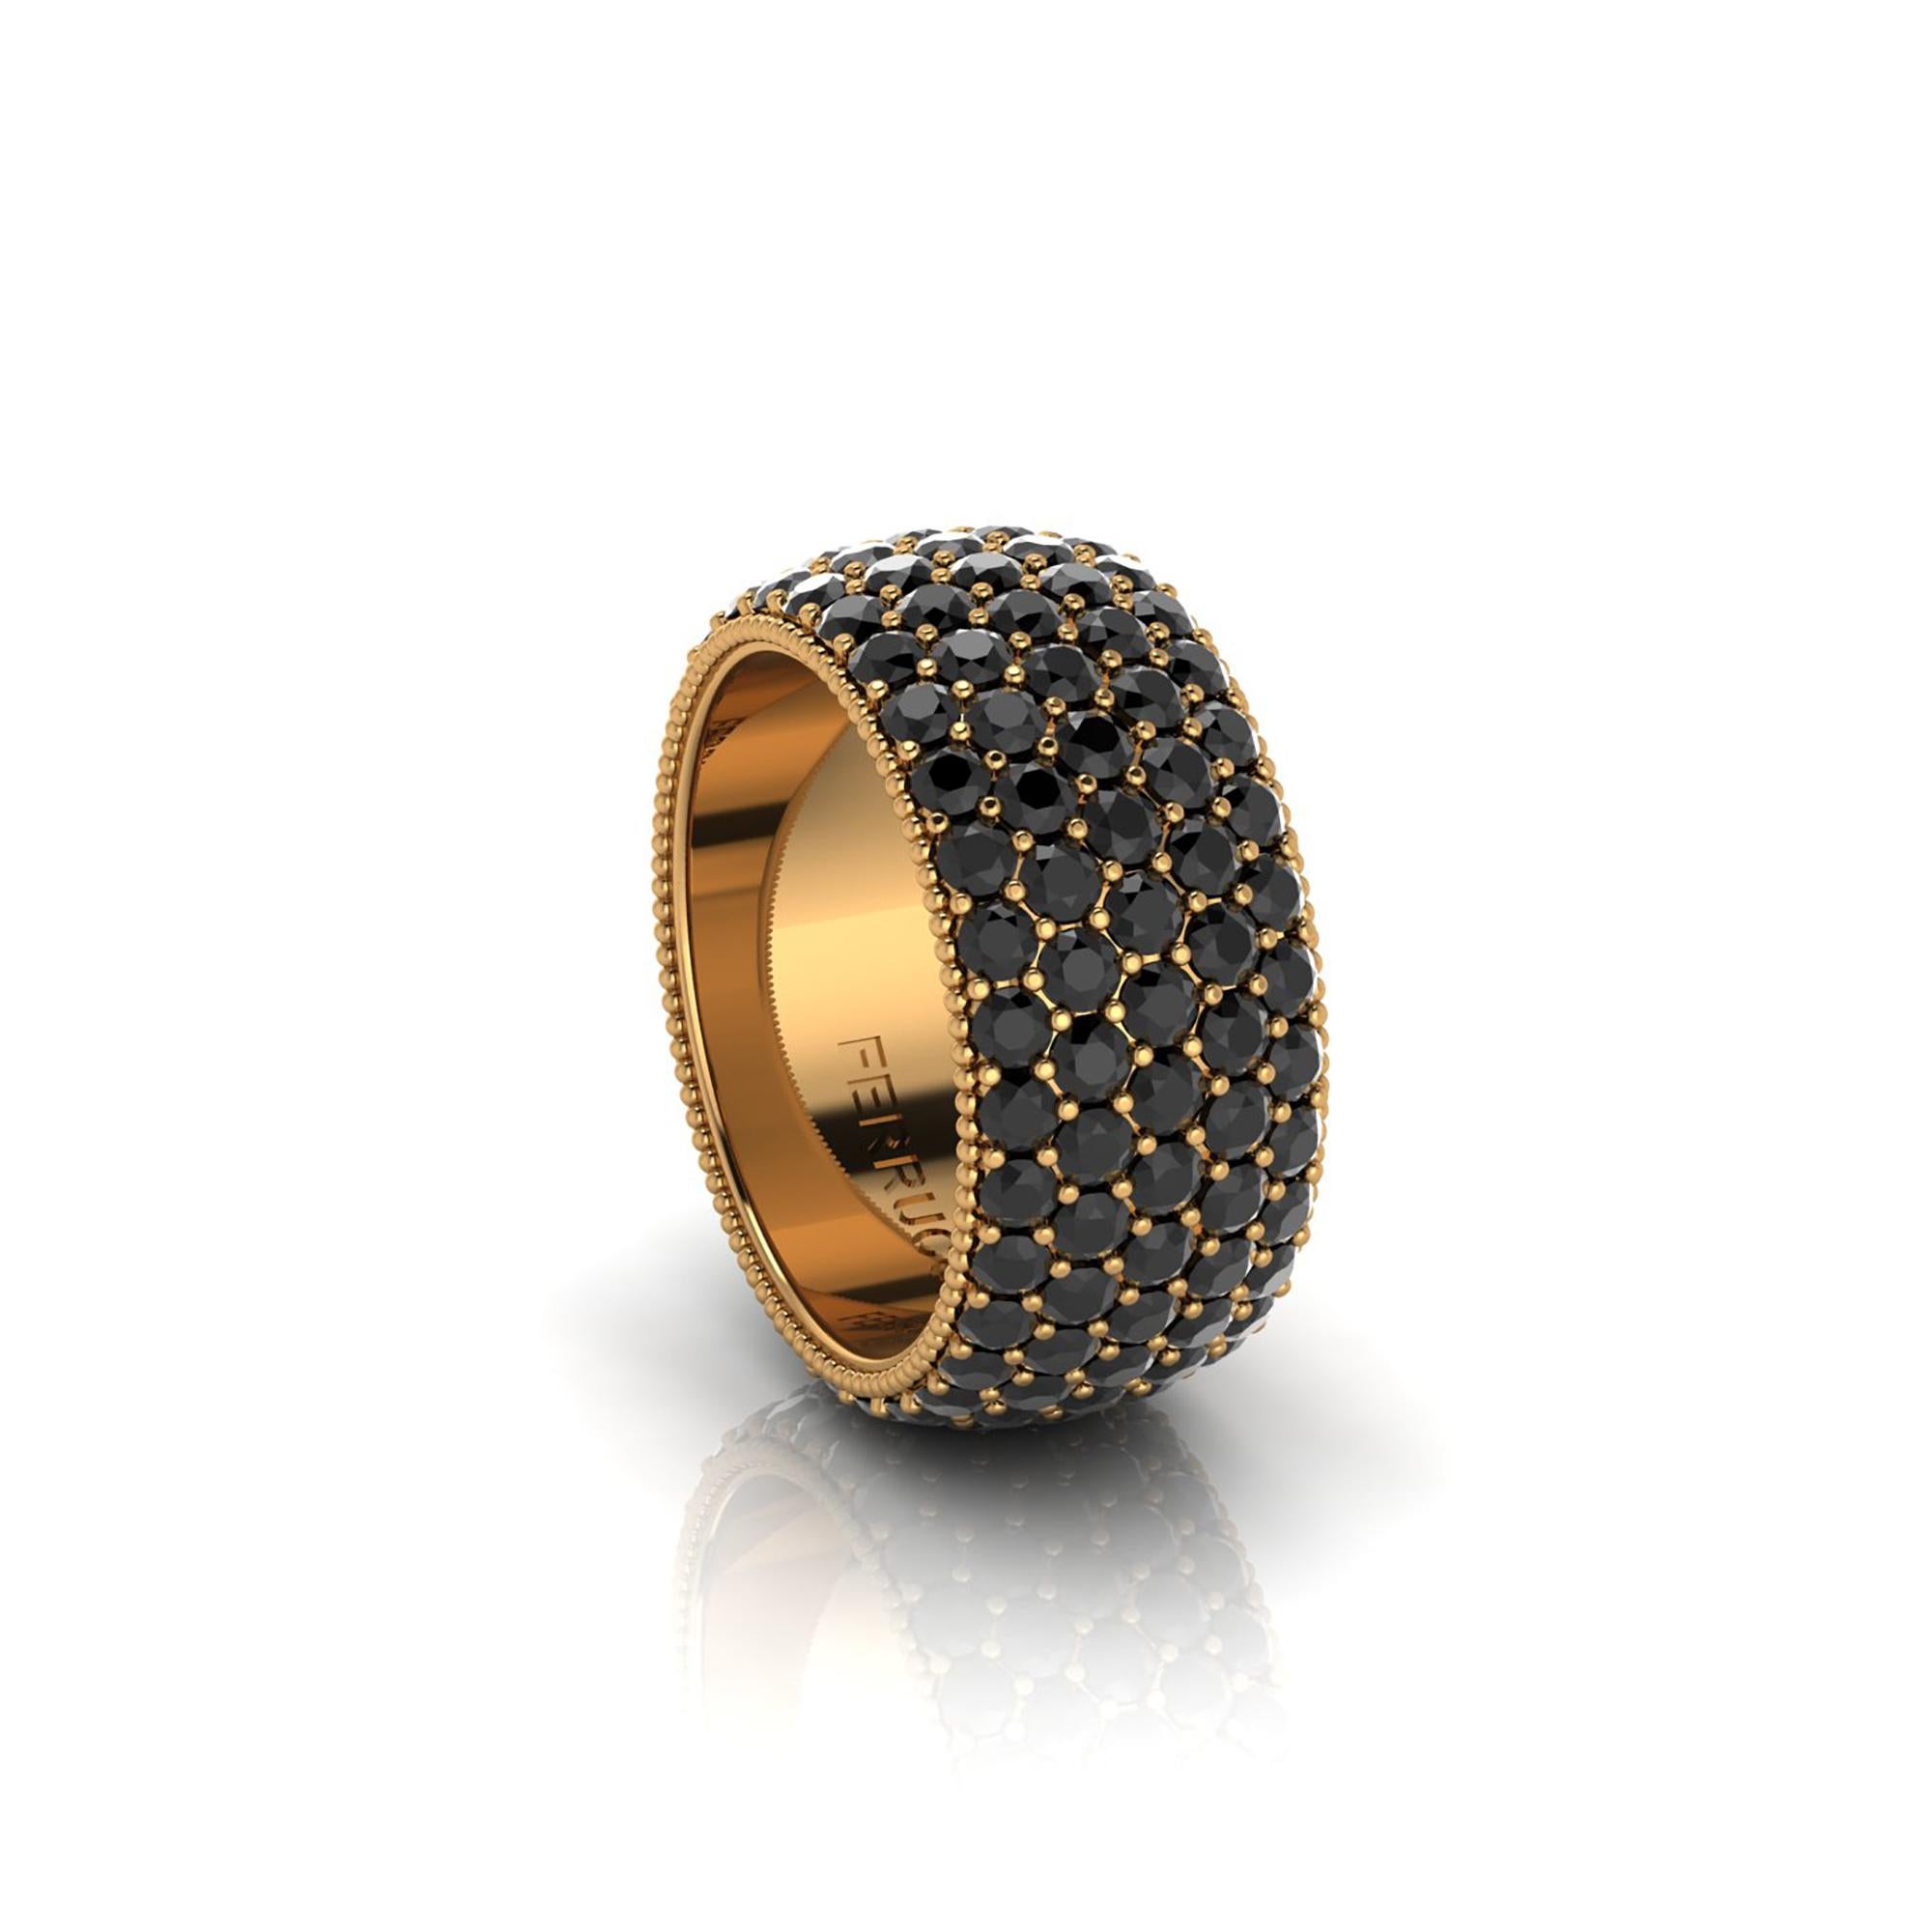 FERRUCCI Wide diamond pave' ring, sparkling  black diamonds, for an approximate total carat weight of 4.75 carats, hand made in New York City by hand by  Italian master jeweler, conceived in 18k yellow gold

This is a Ring size 7, we offer the